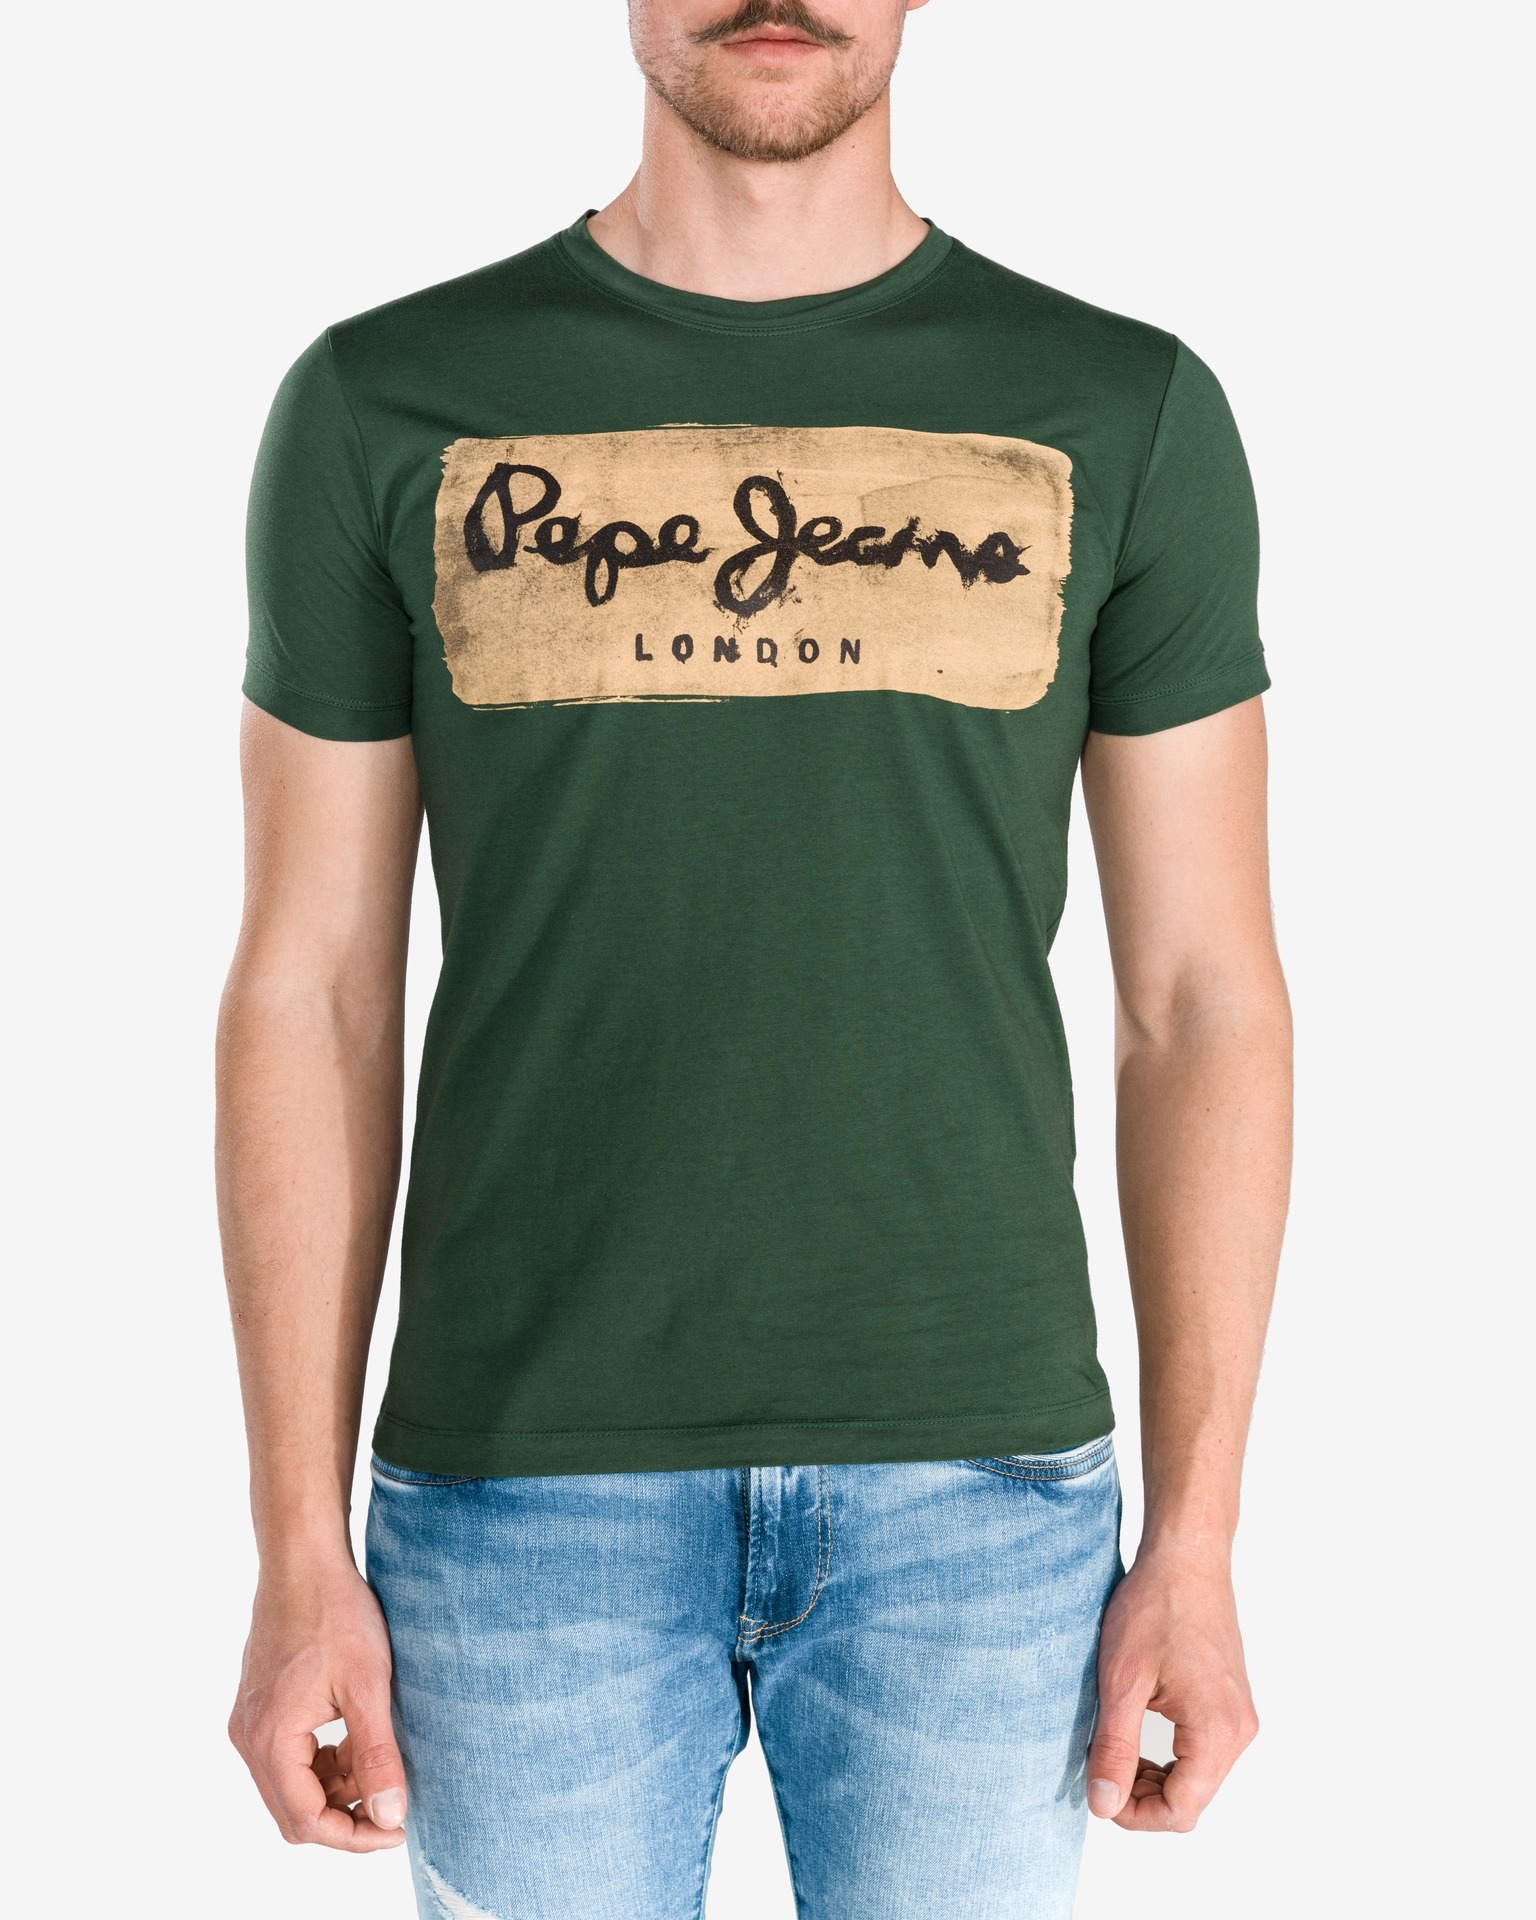 Charing Jeans T-shirt - Pepe